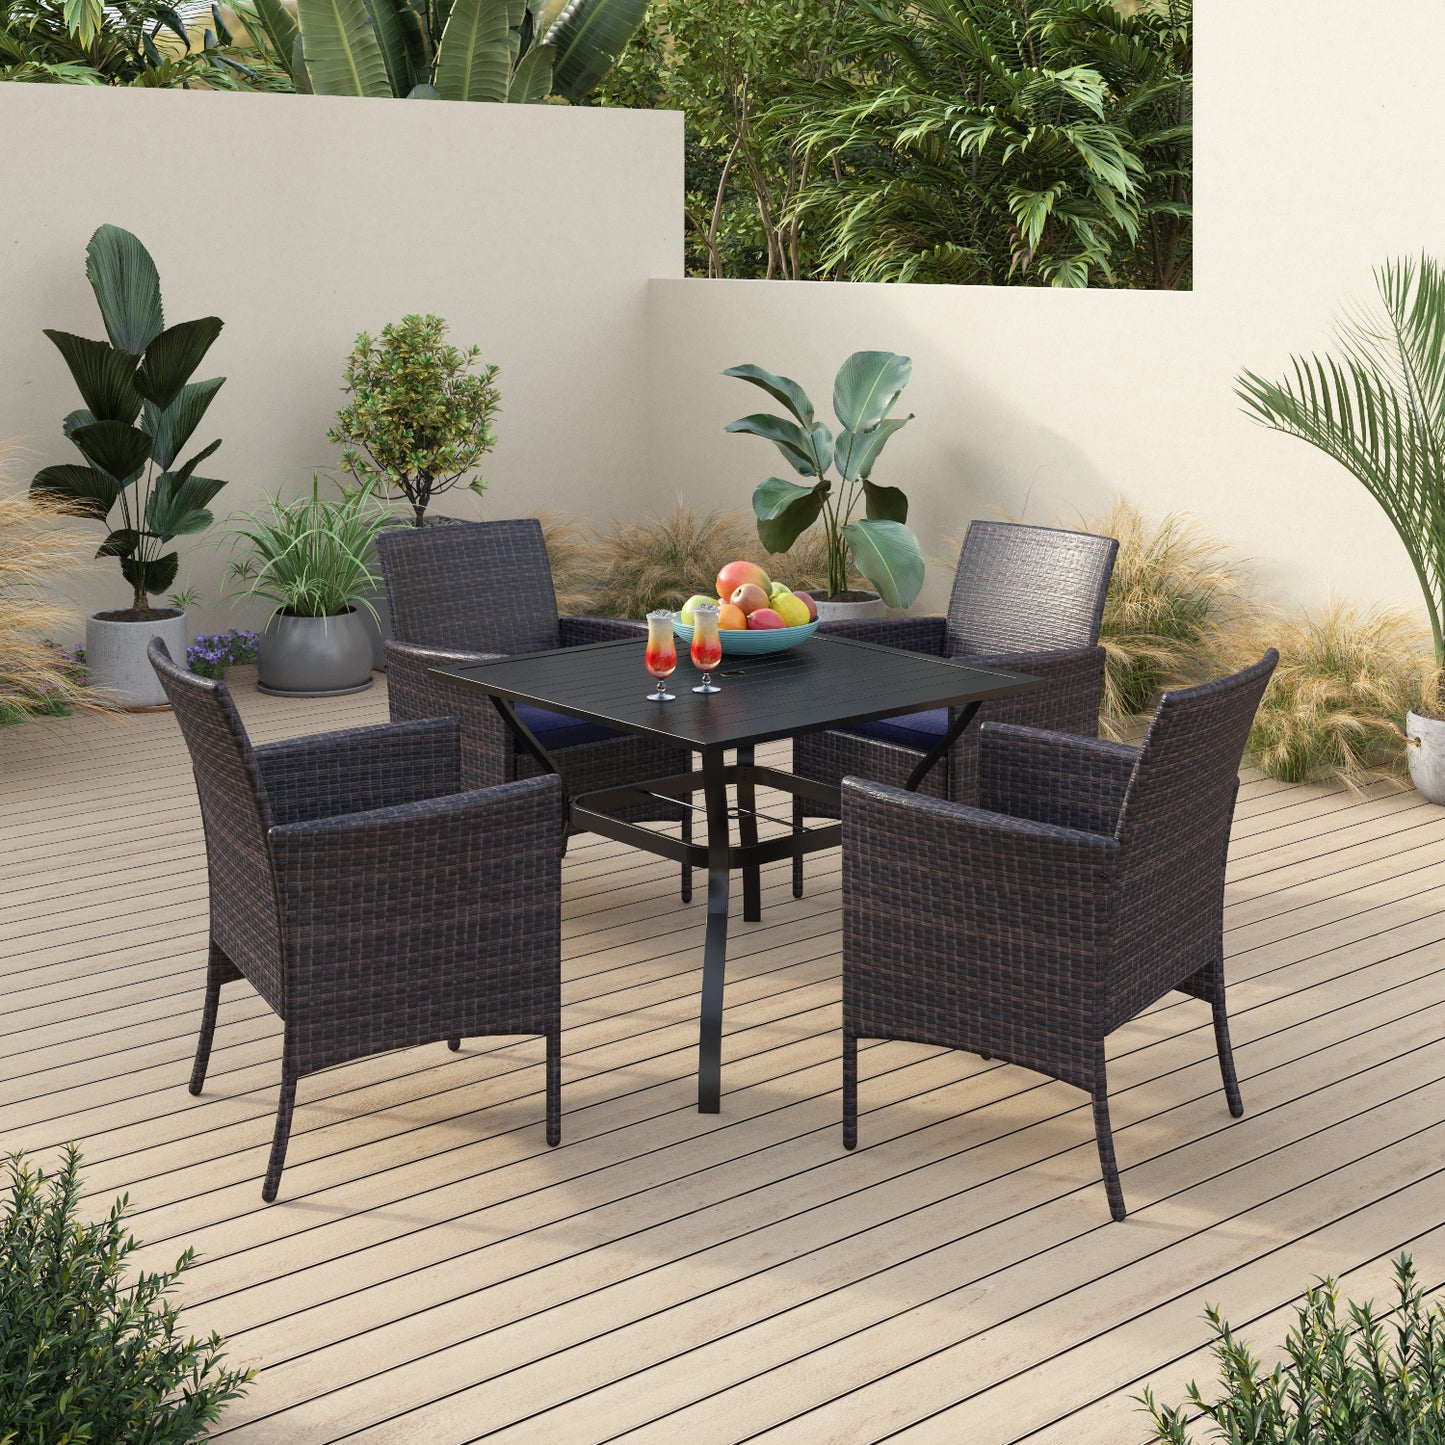 Sophia & William 5 Pieces Patio Rattan Dining Set Wicker Chairs and Metal Dining Table